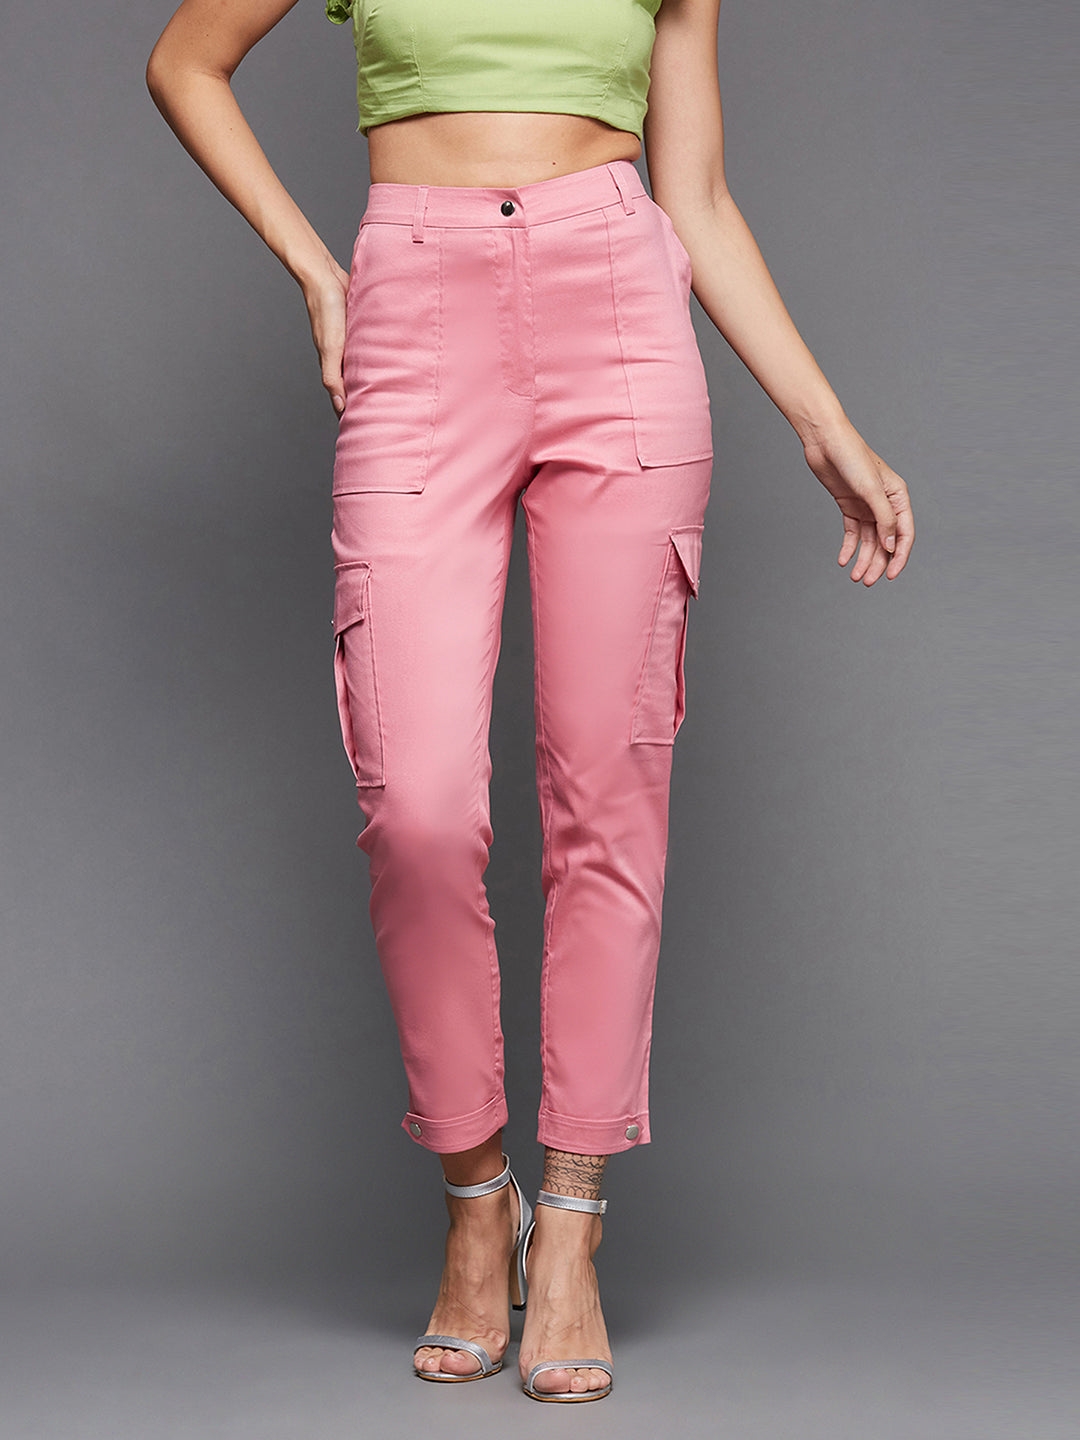 MISS CHASE | Pink Solid Polyester High Waist Regular Length Trouser